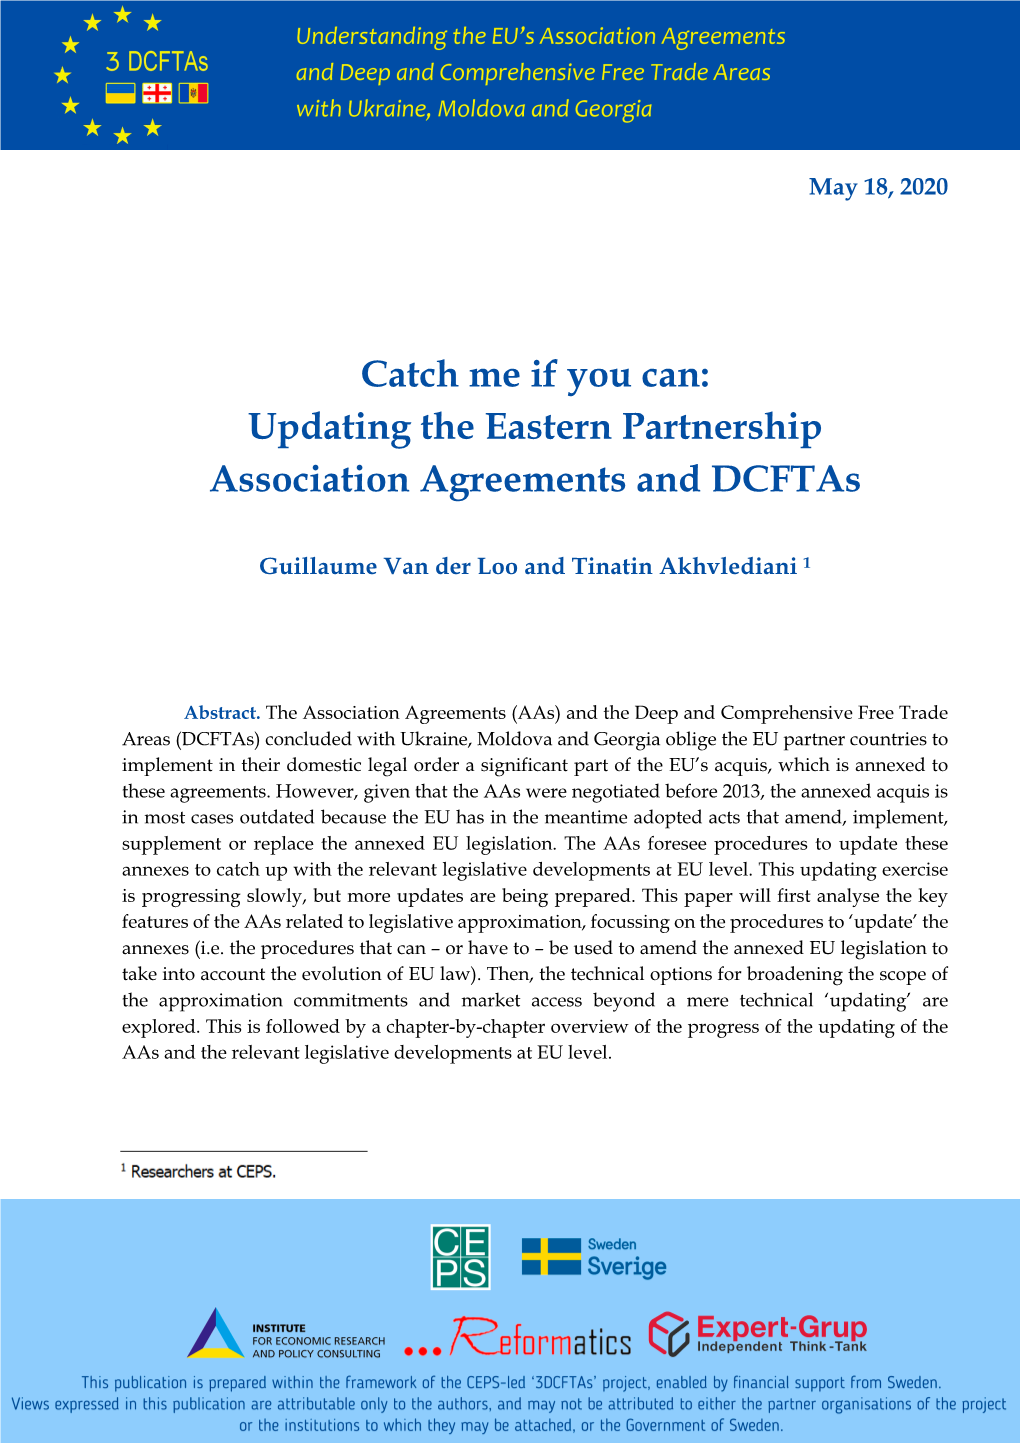 Updating the Eastern Partnership Association Agreements and Dcftas